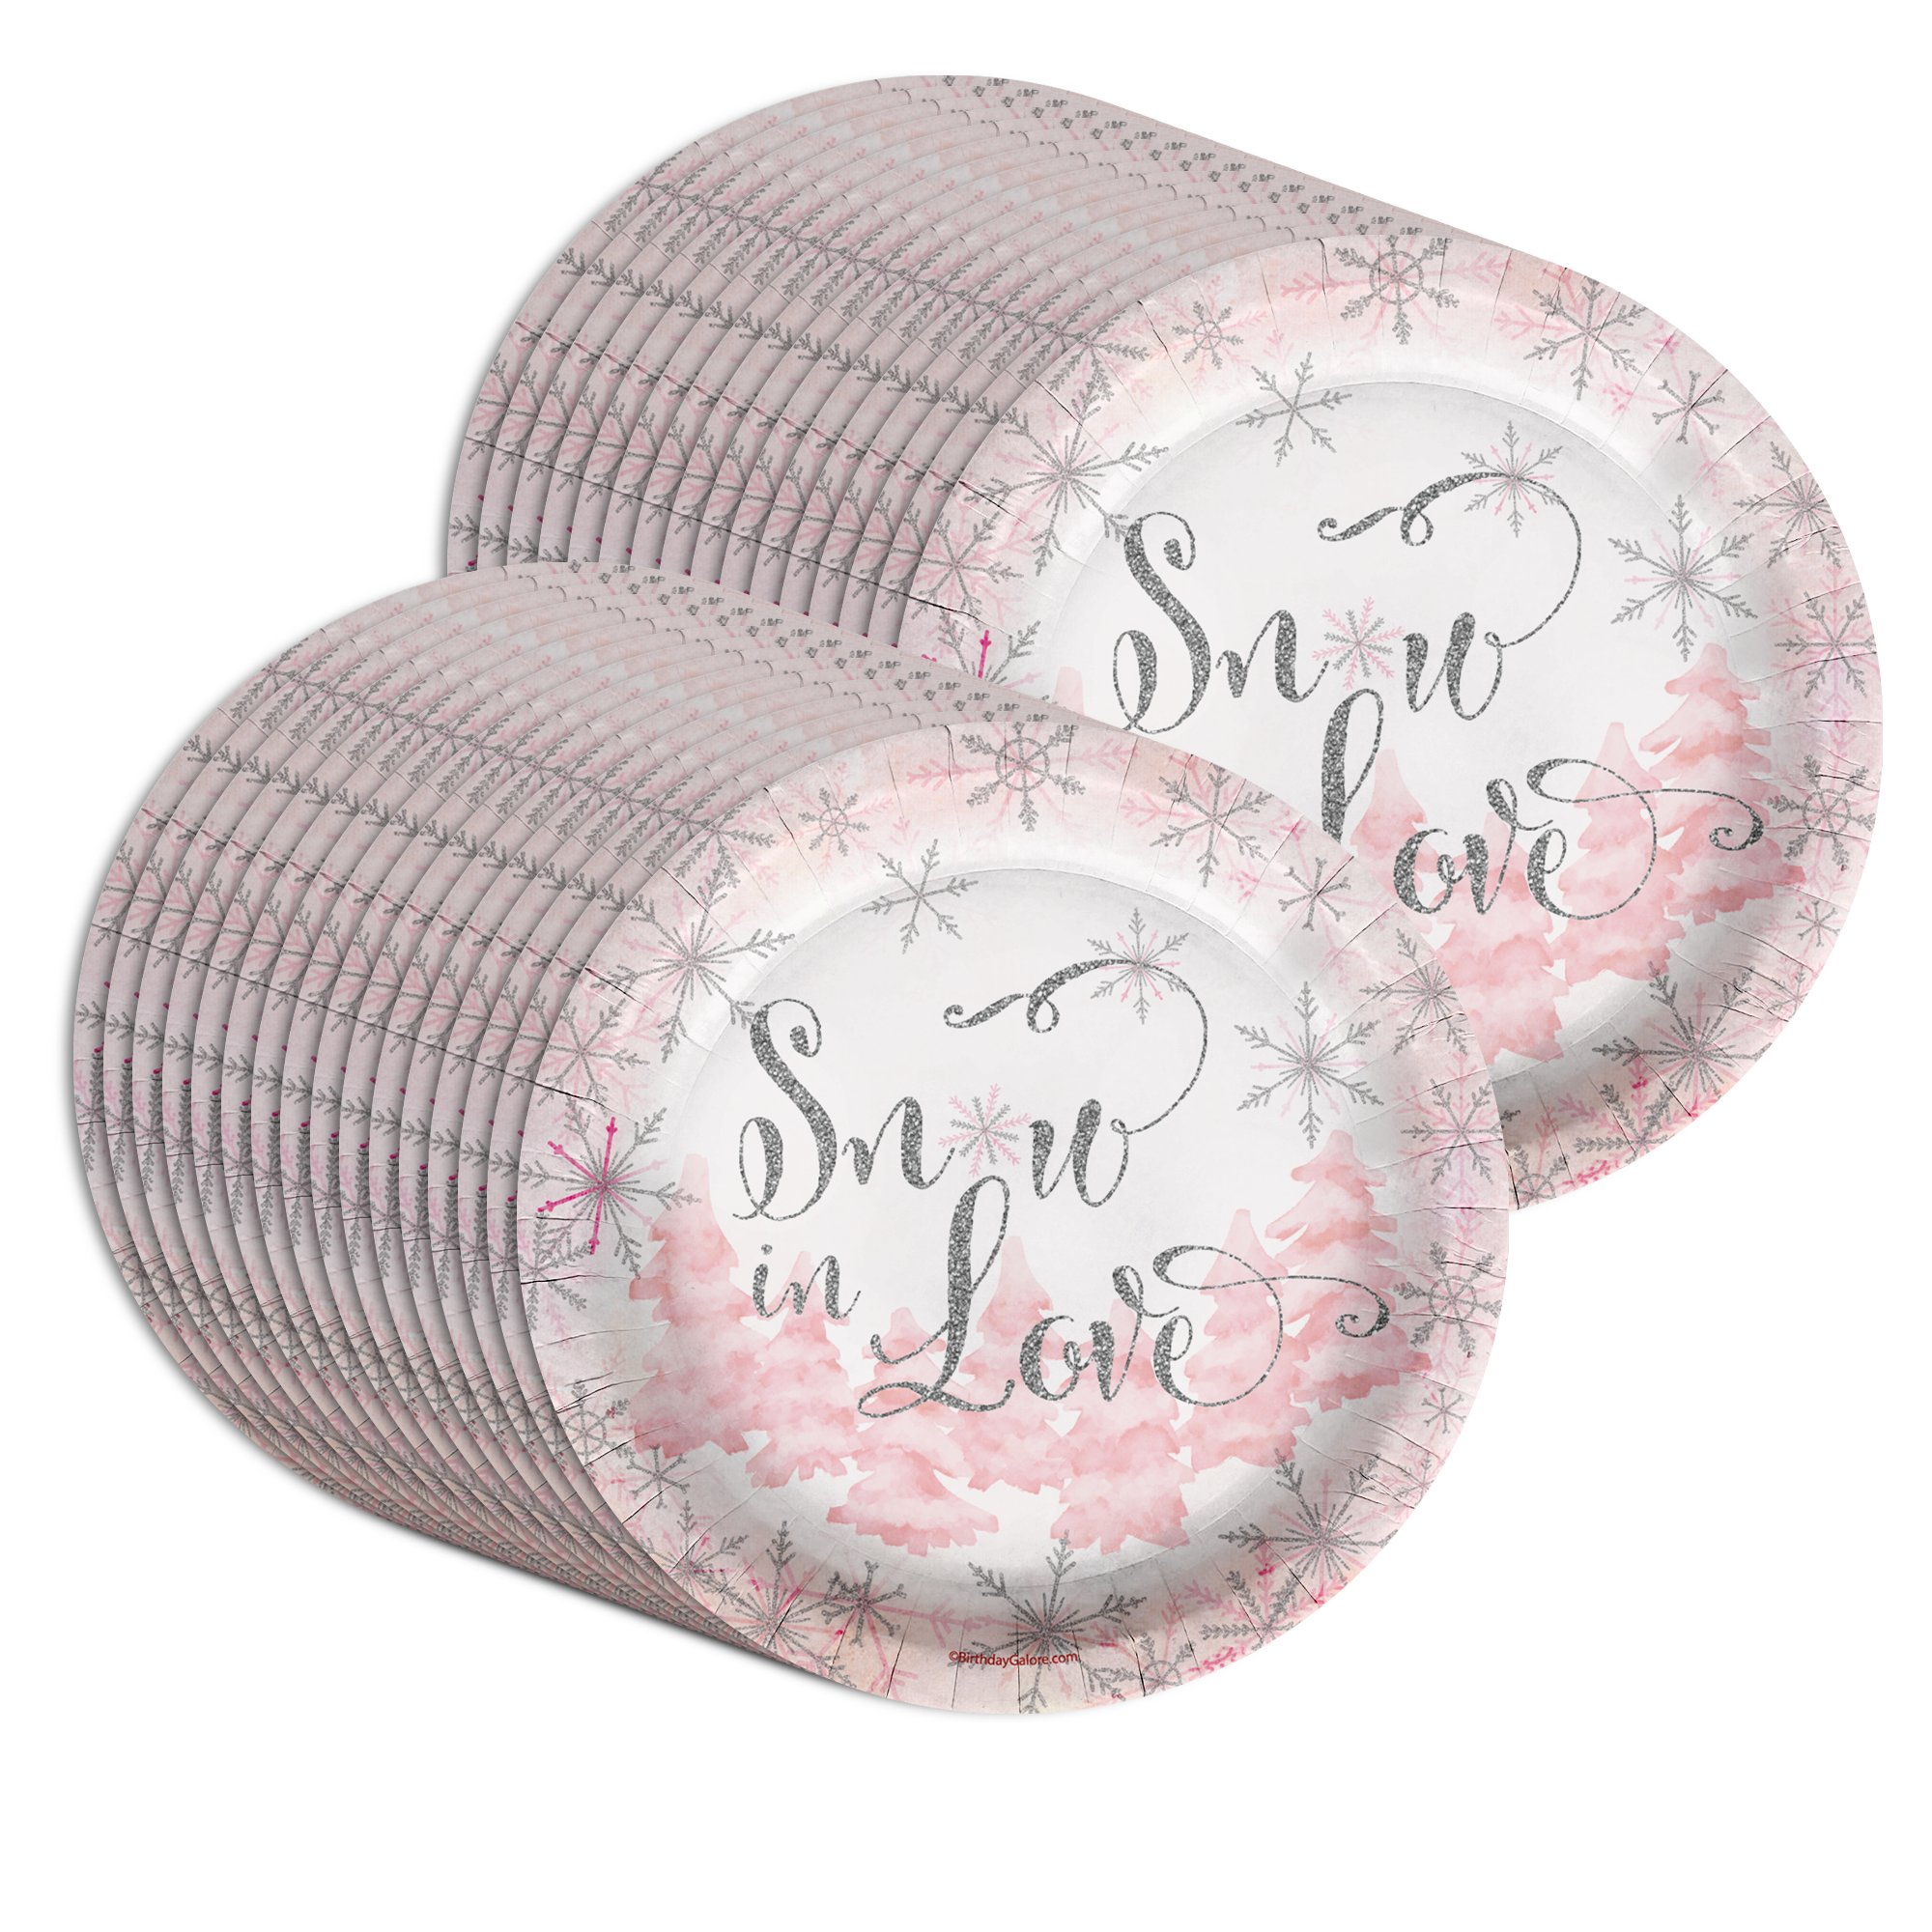 Snow in Love Bridal Shower Party 9" Dinner Plates 32 Count